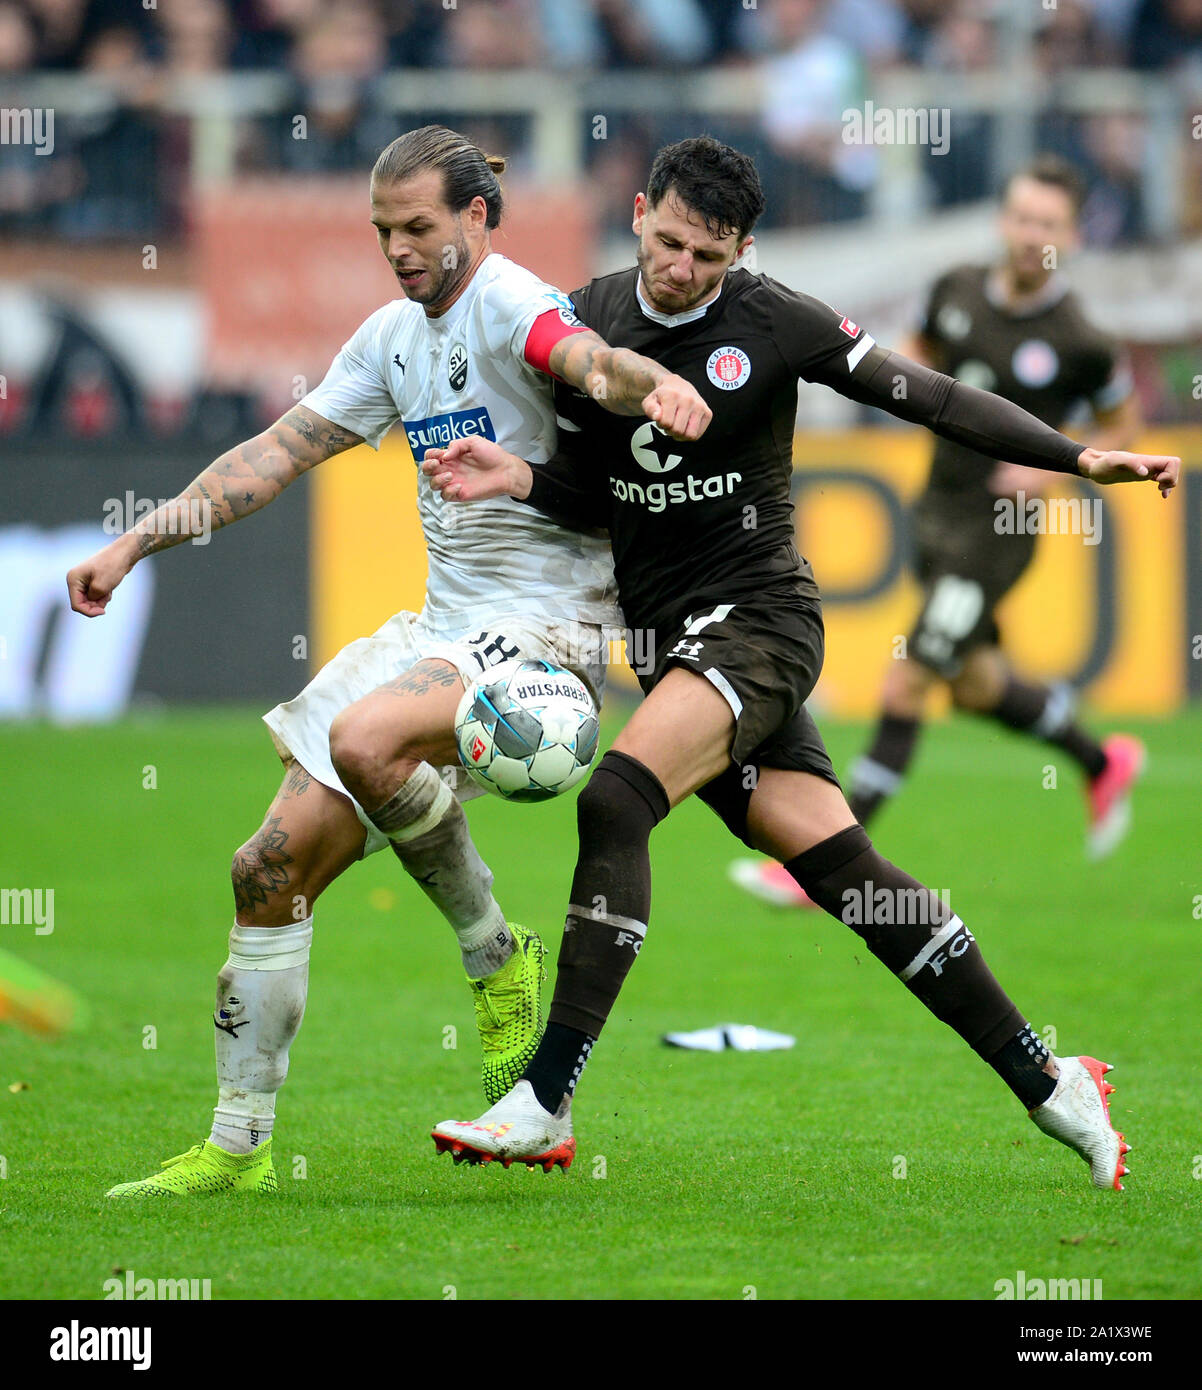 Hamburg, Germany. 29th Sep, 2019. Soccer: 2nd Bundesliga, 8th matchday: FC St. Pauli - SV Sandhausen at Millerntor Stadium. Sandhausen's Dennis Diekmeier (l) and Hamburg's Matt Penney fight for the ball. Credit: Daniel Bockwoldt/dpa - IMPORTANT NOTE: In accordance with the requirements of the DFL Deutsche Fußball Liga or the DFB Deutscher Fußball-Bund, it is prohibited to use or have used photographs taken in the stadium and/or the match in the form of sequence images and/or video-like photo sequences./dpa/Alamy Live News Stock Photo